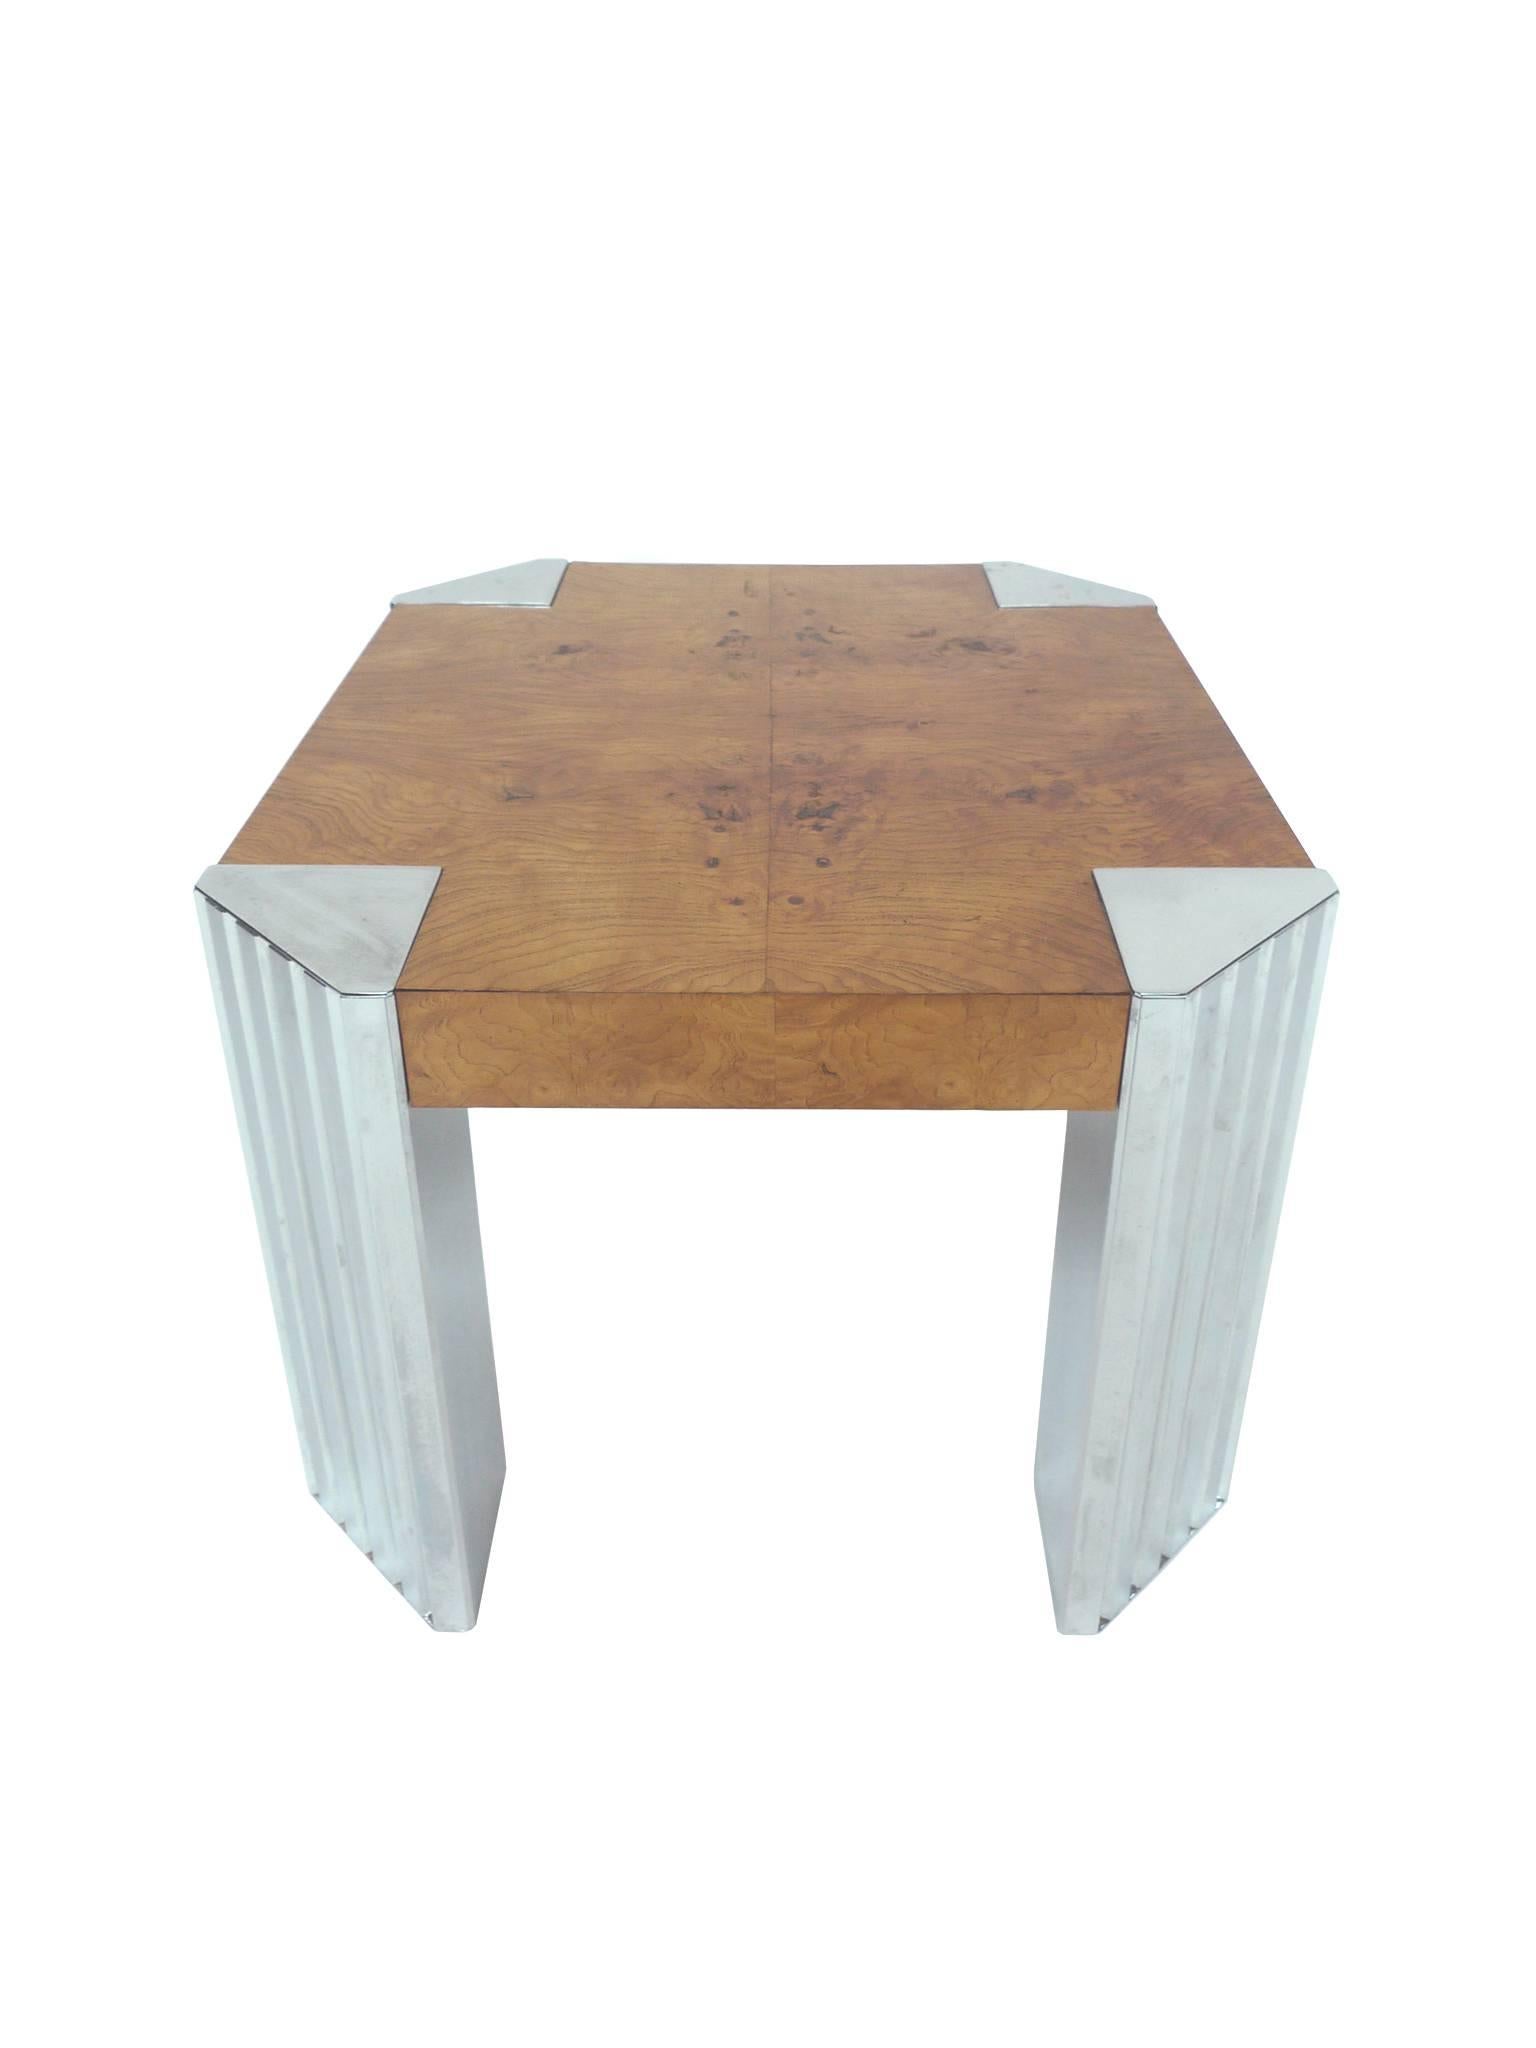 This 1970s cocktail table is in the Art Deco style. It's comprised of a 2 3/4-inch burl wood top and chrome legs. The tabletop is a rich honey yellow hue with a beautiful burl wood grain pattern, while the chrome legs are triangular with ridged